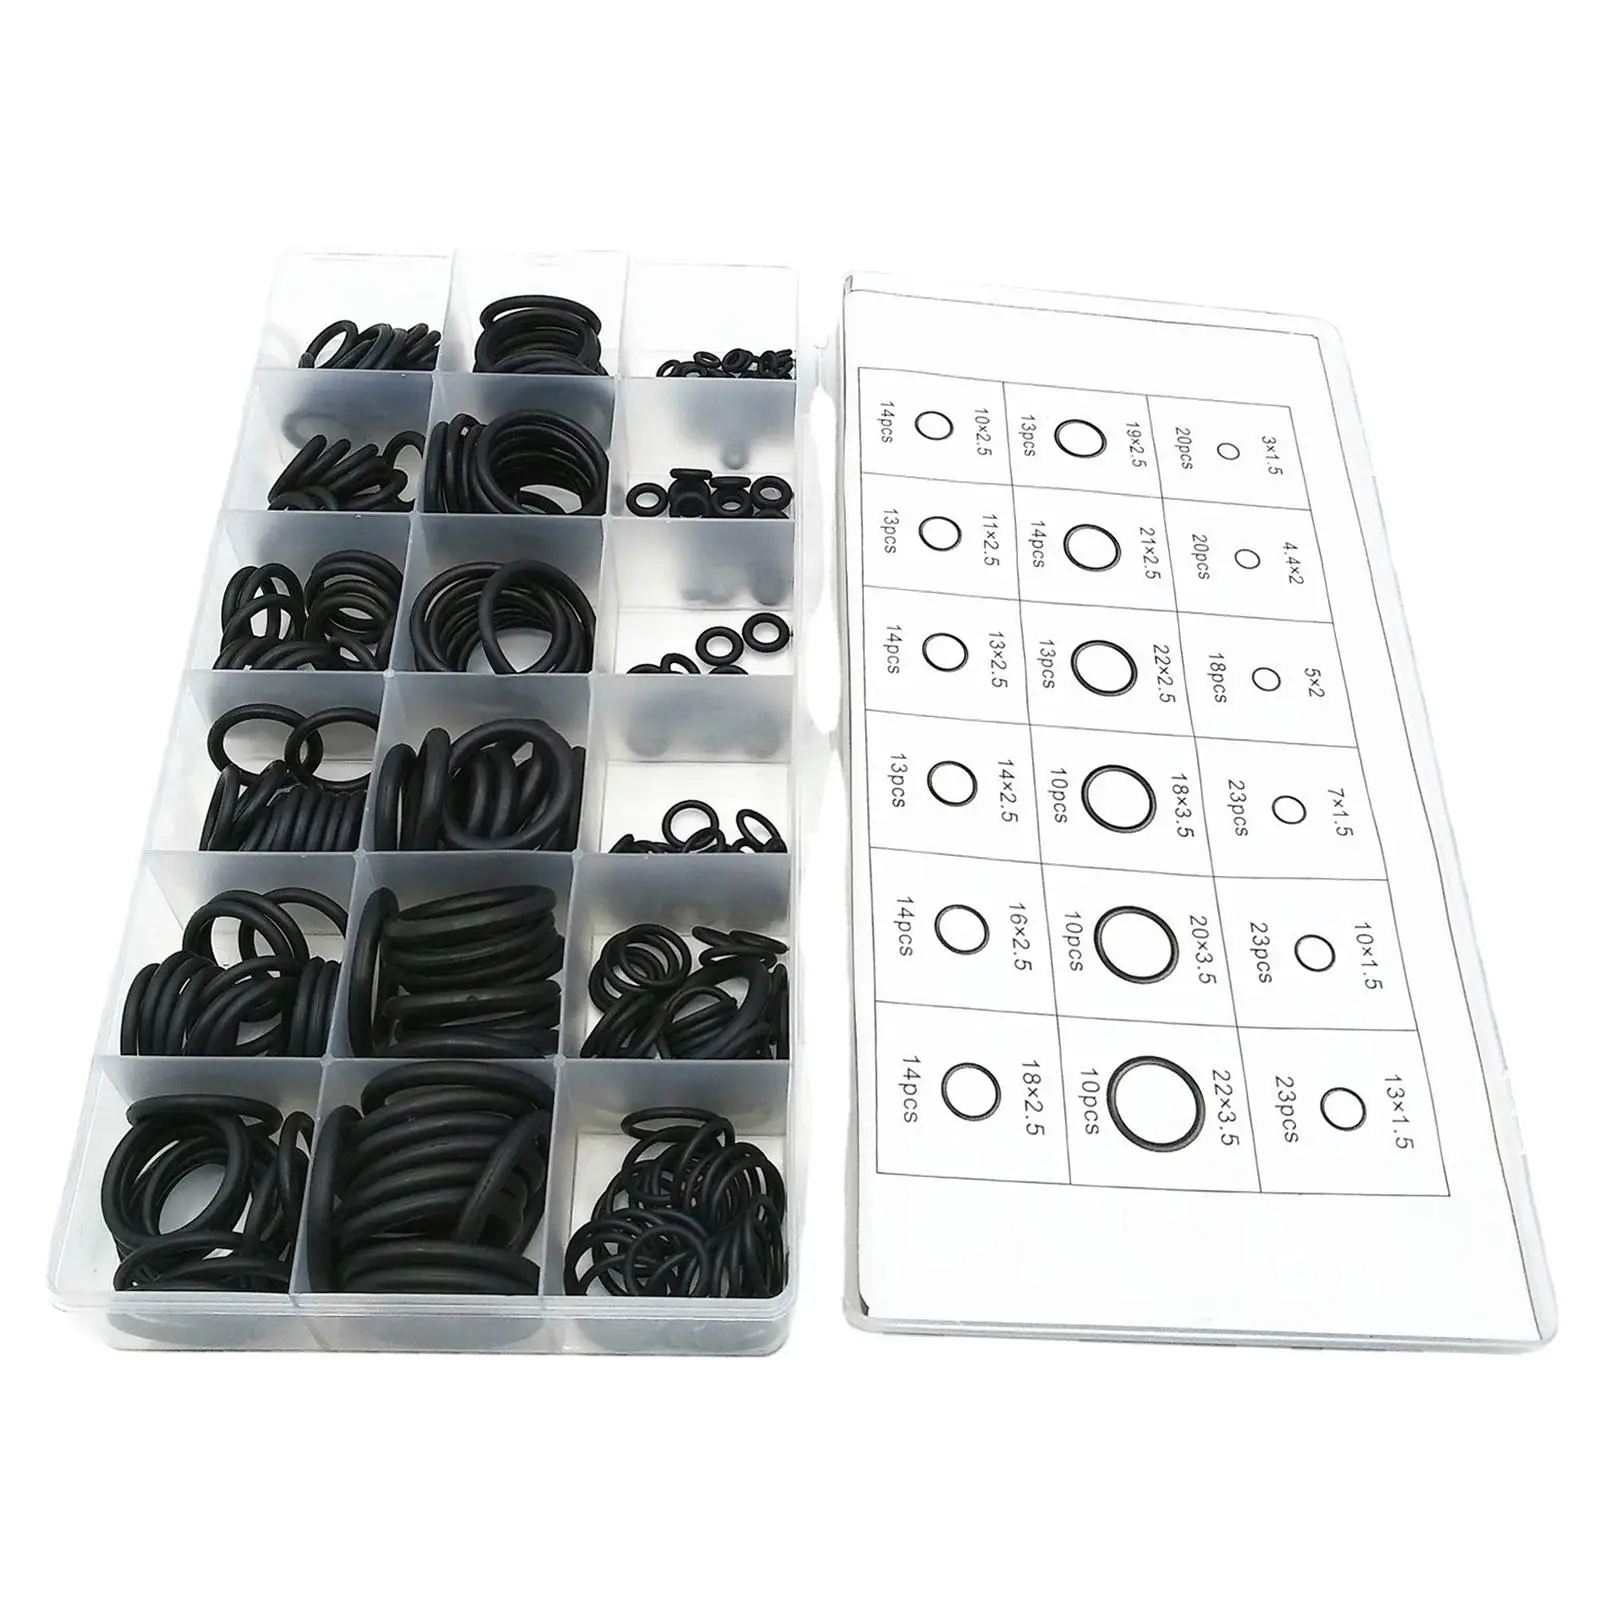 279x Rubber O 18 Sizes Round Fits for Mechanics Workshop